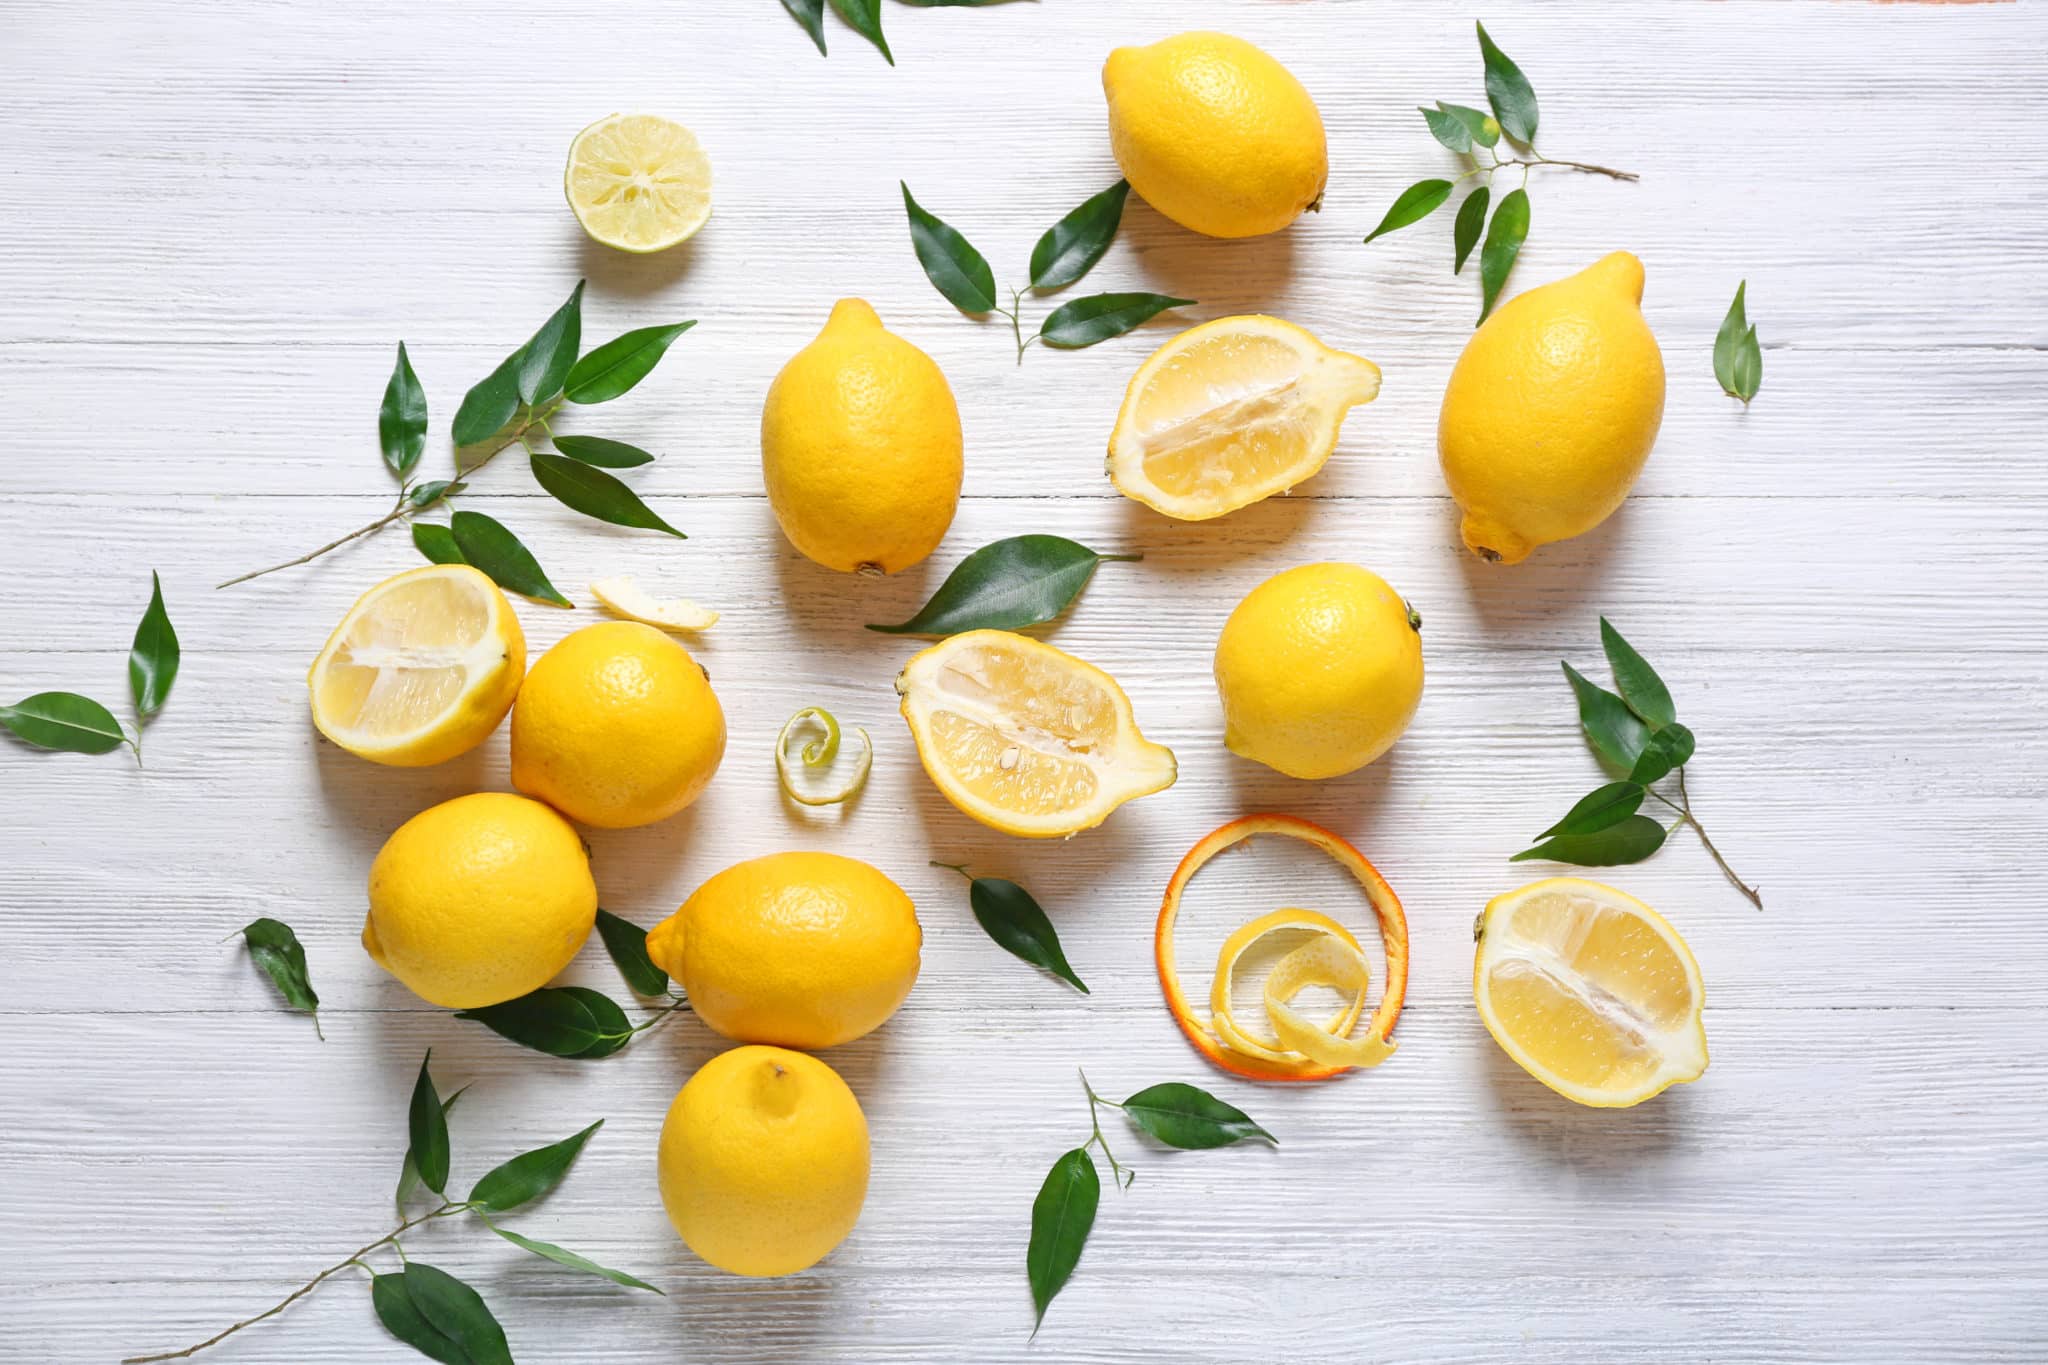 Lemons and greenery on white table